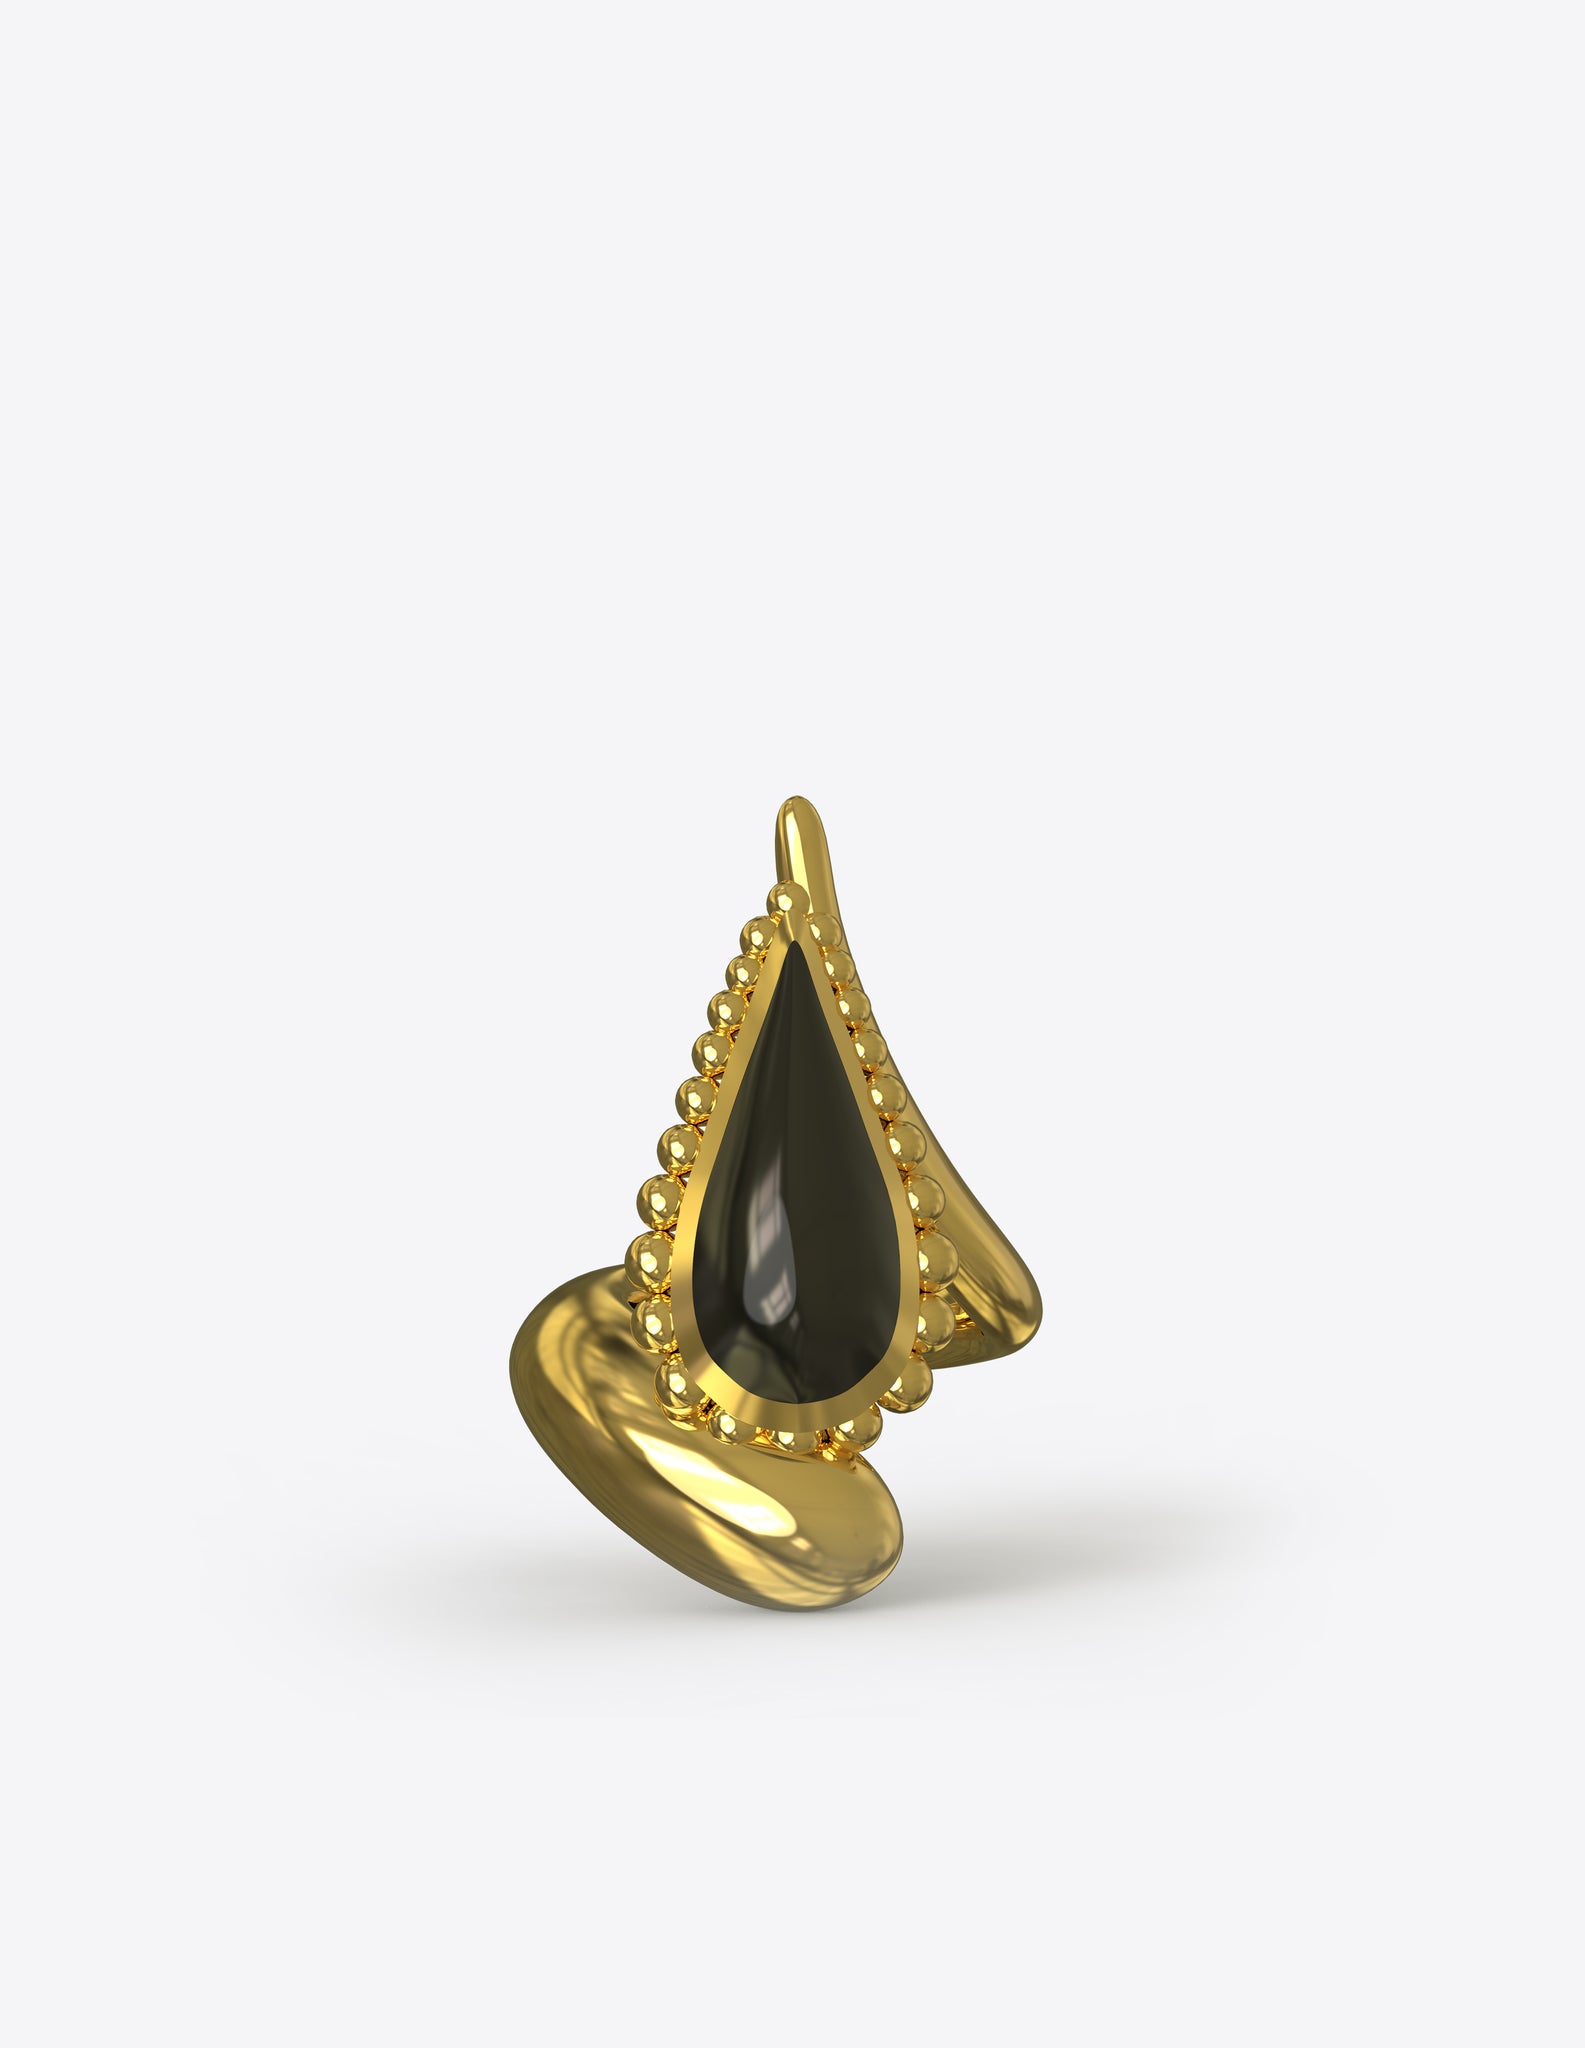 Compass Ring in Polished Gold Vermeil with Onyx